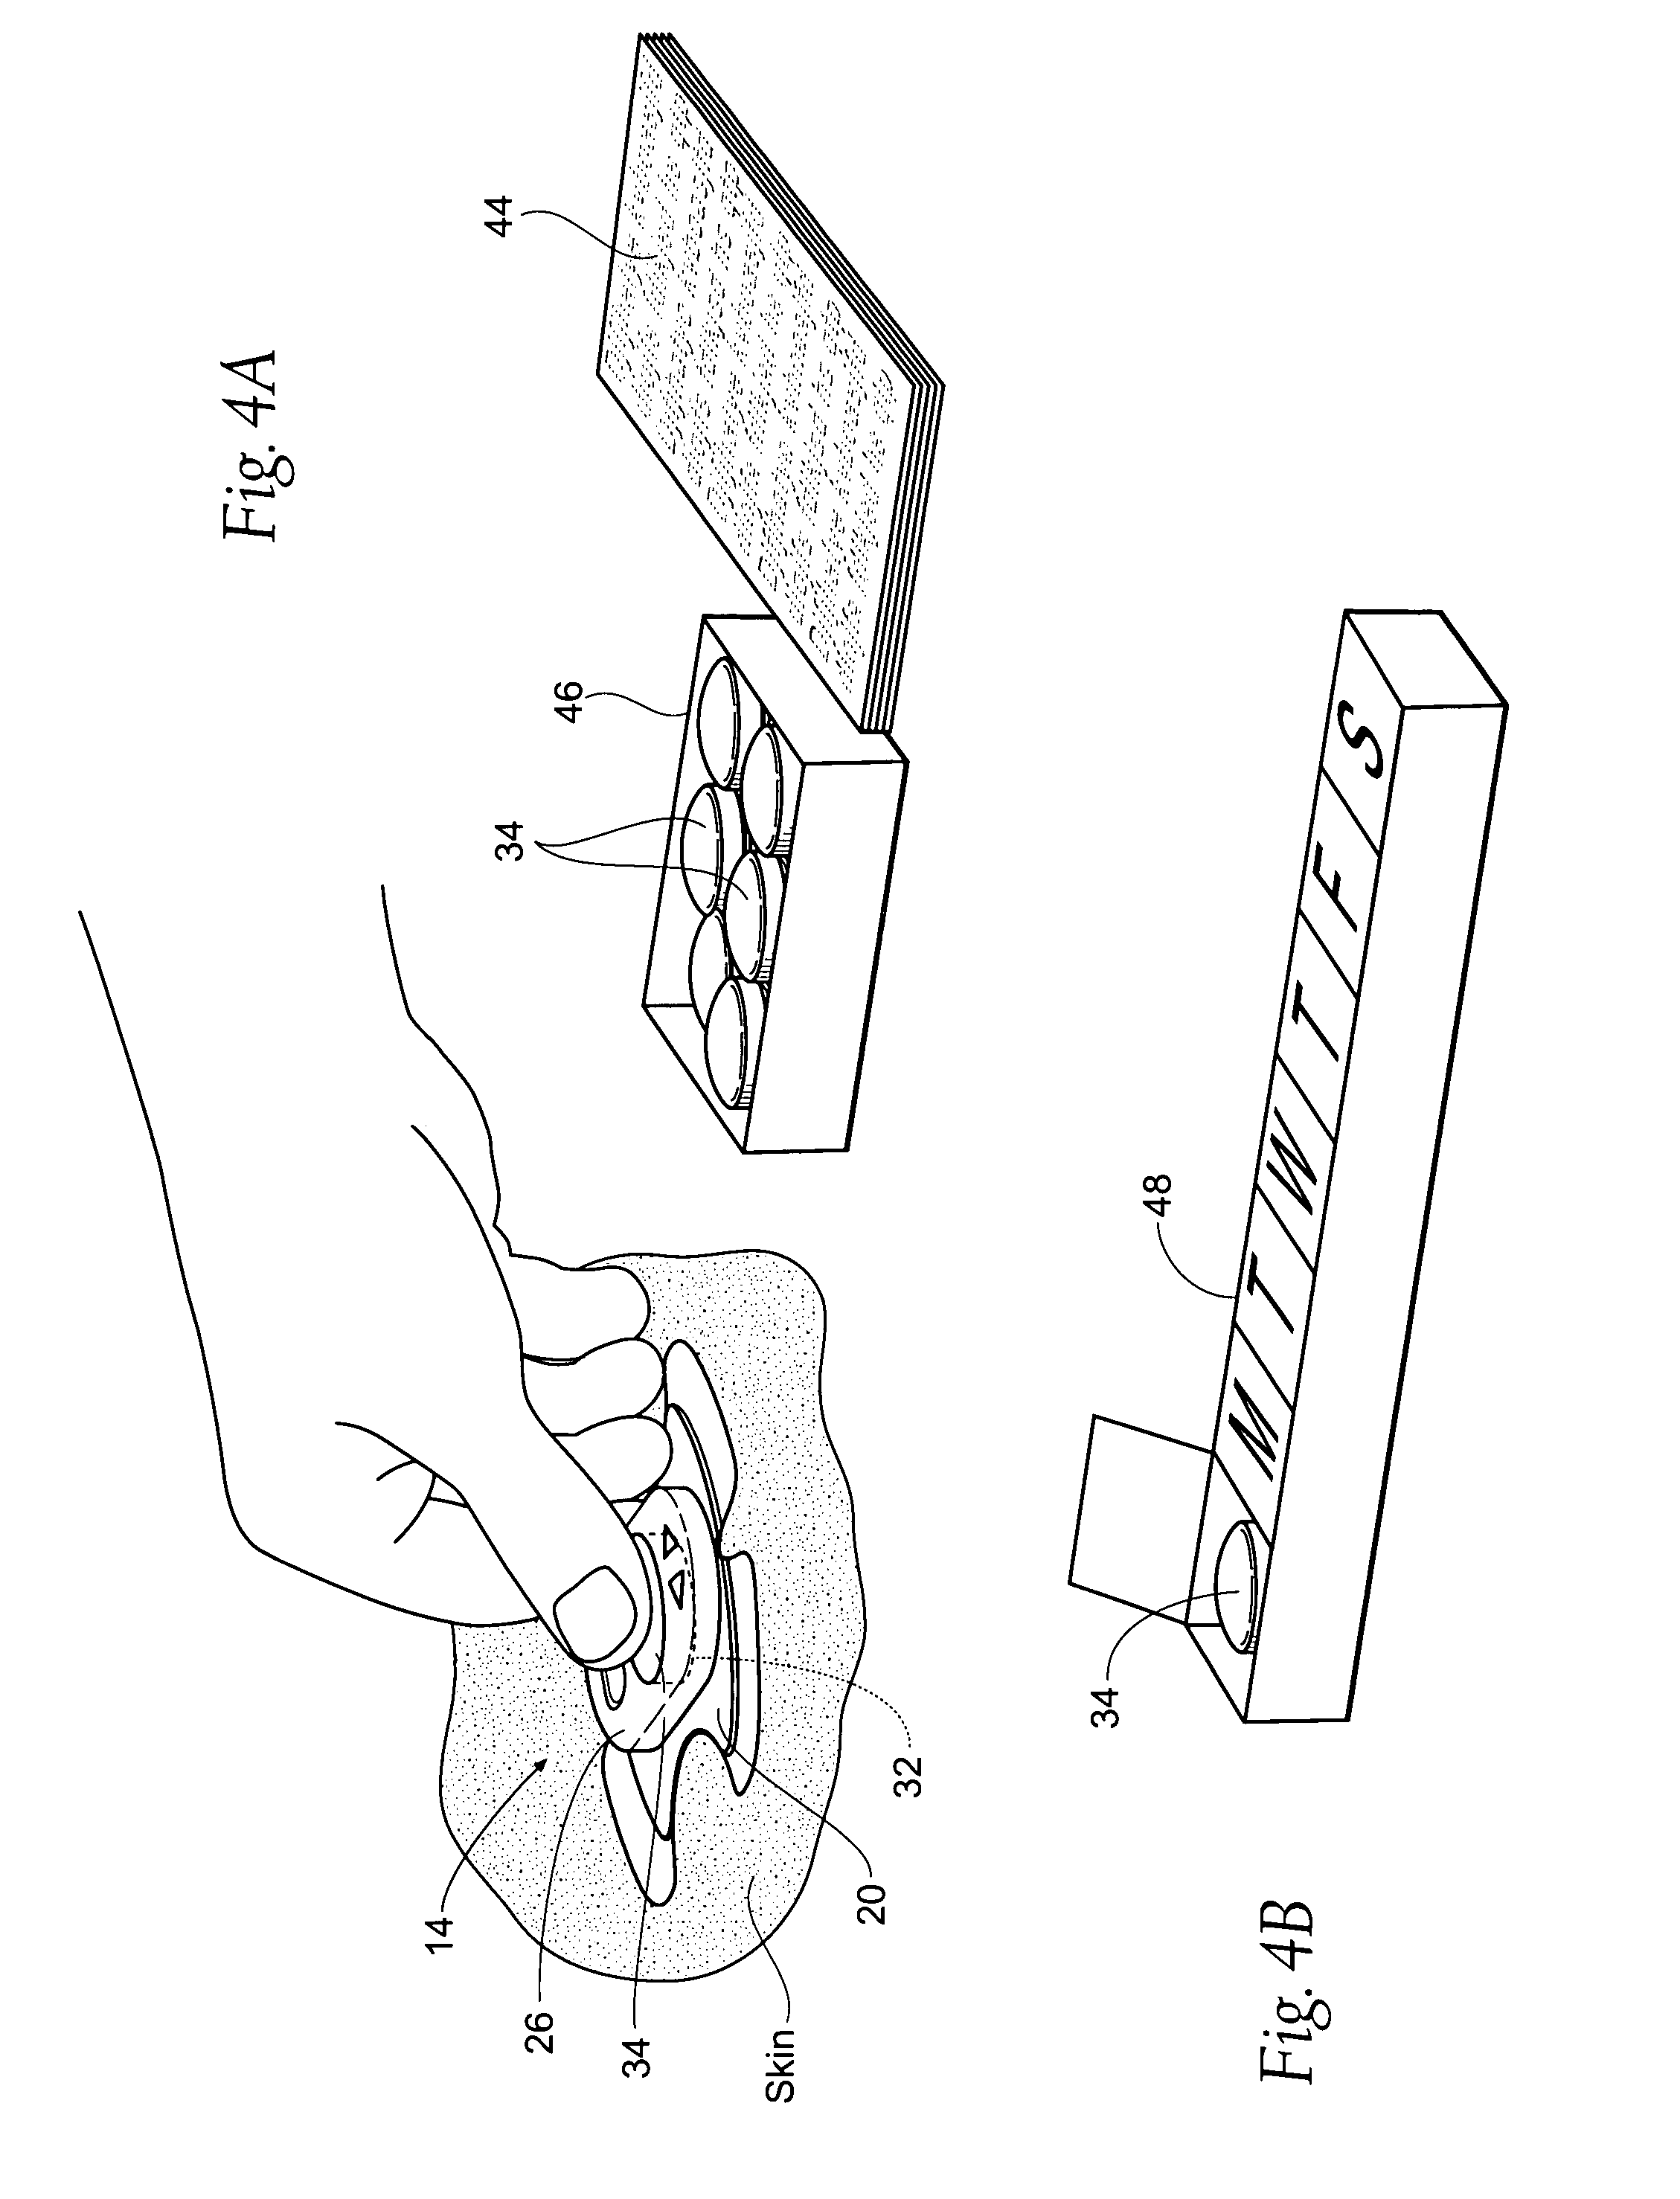 Systems and methods for a trial stage and/or long-term treatment of disorders of the body using neurostimulation